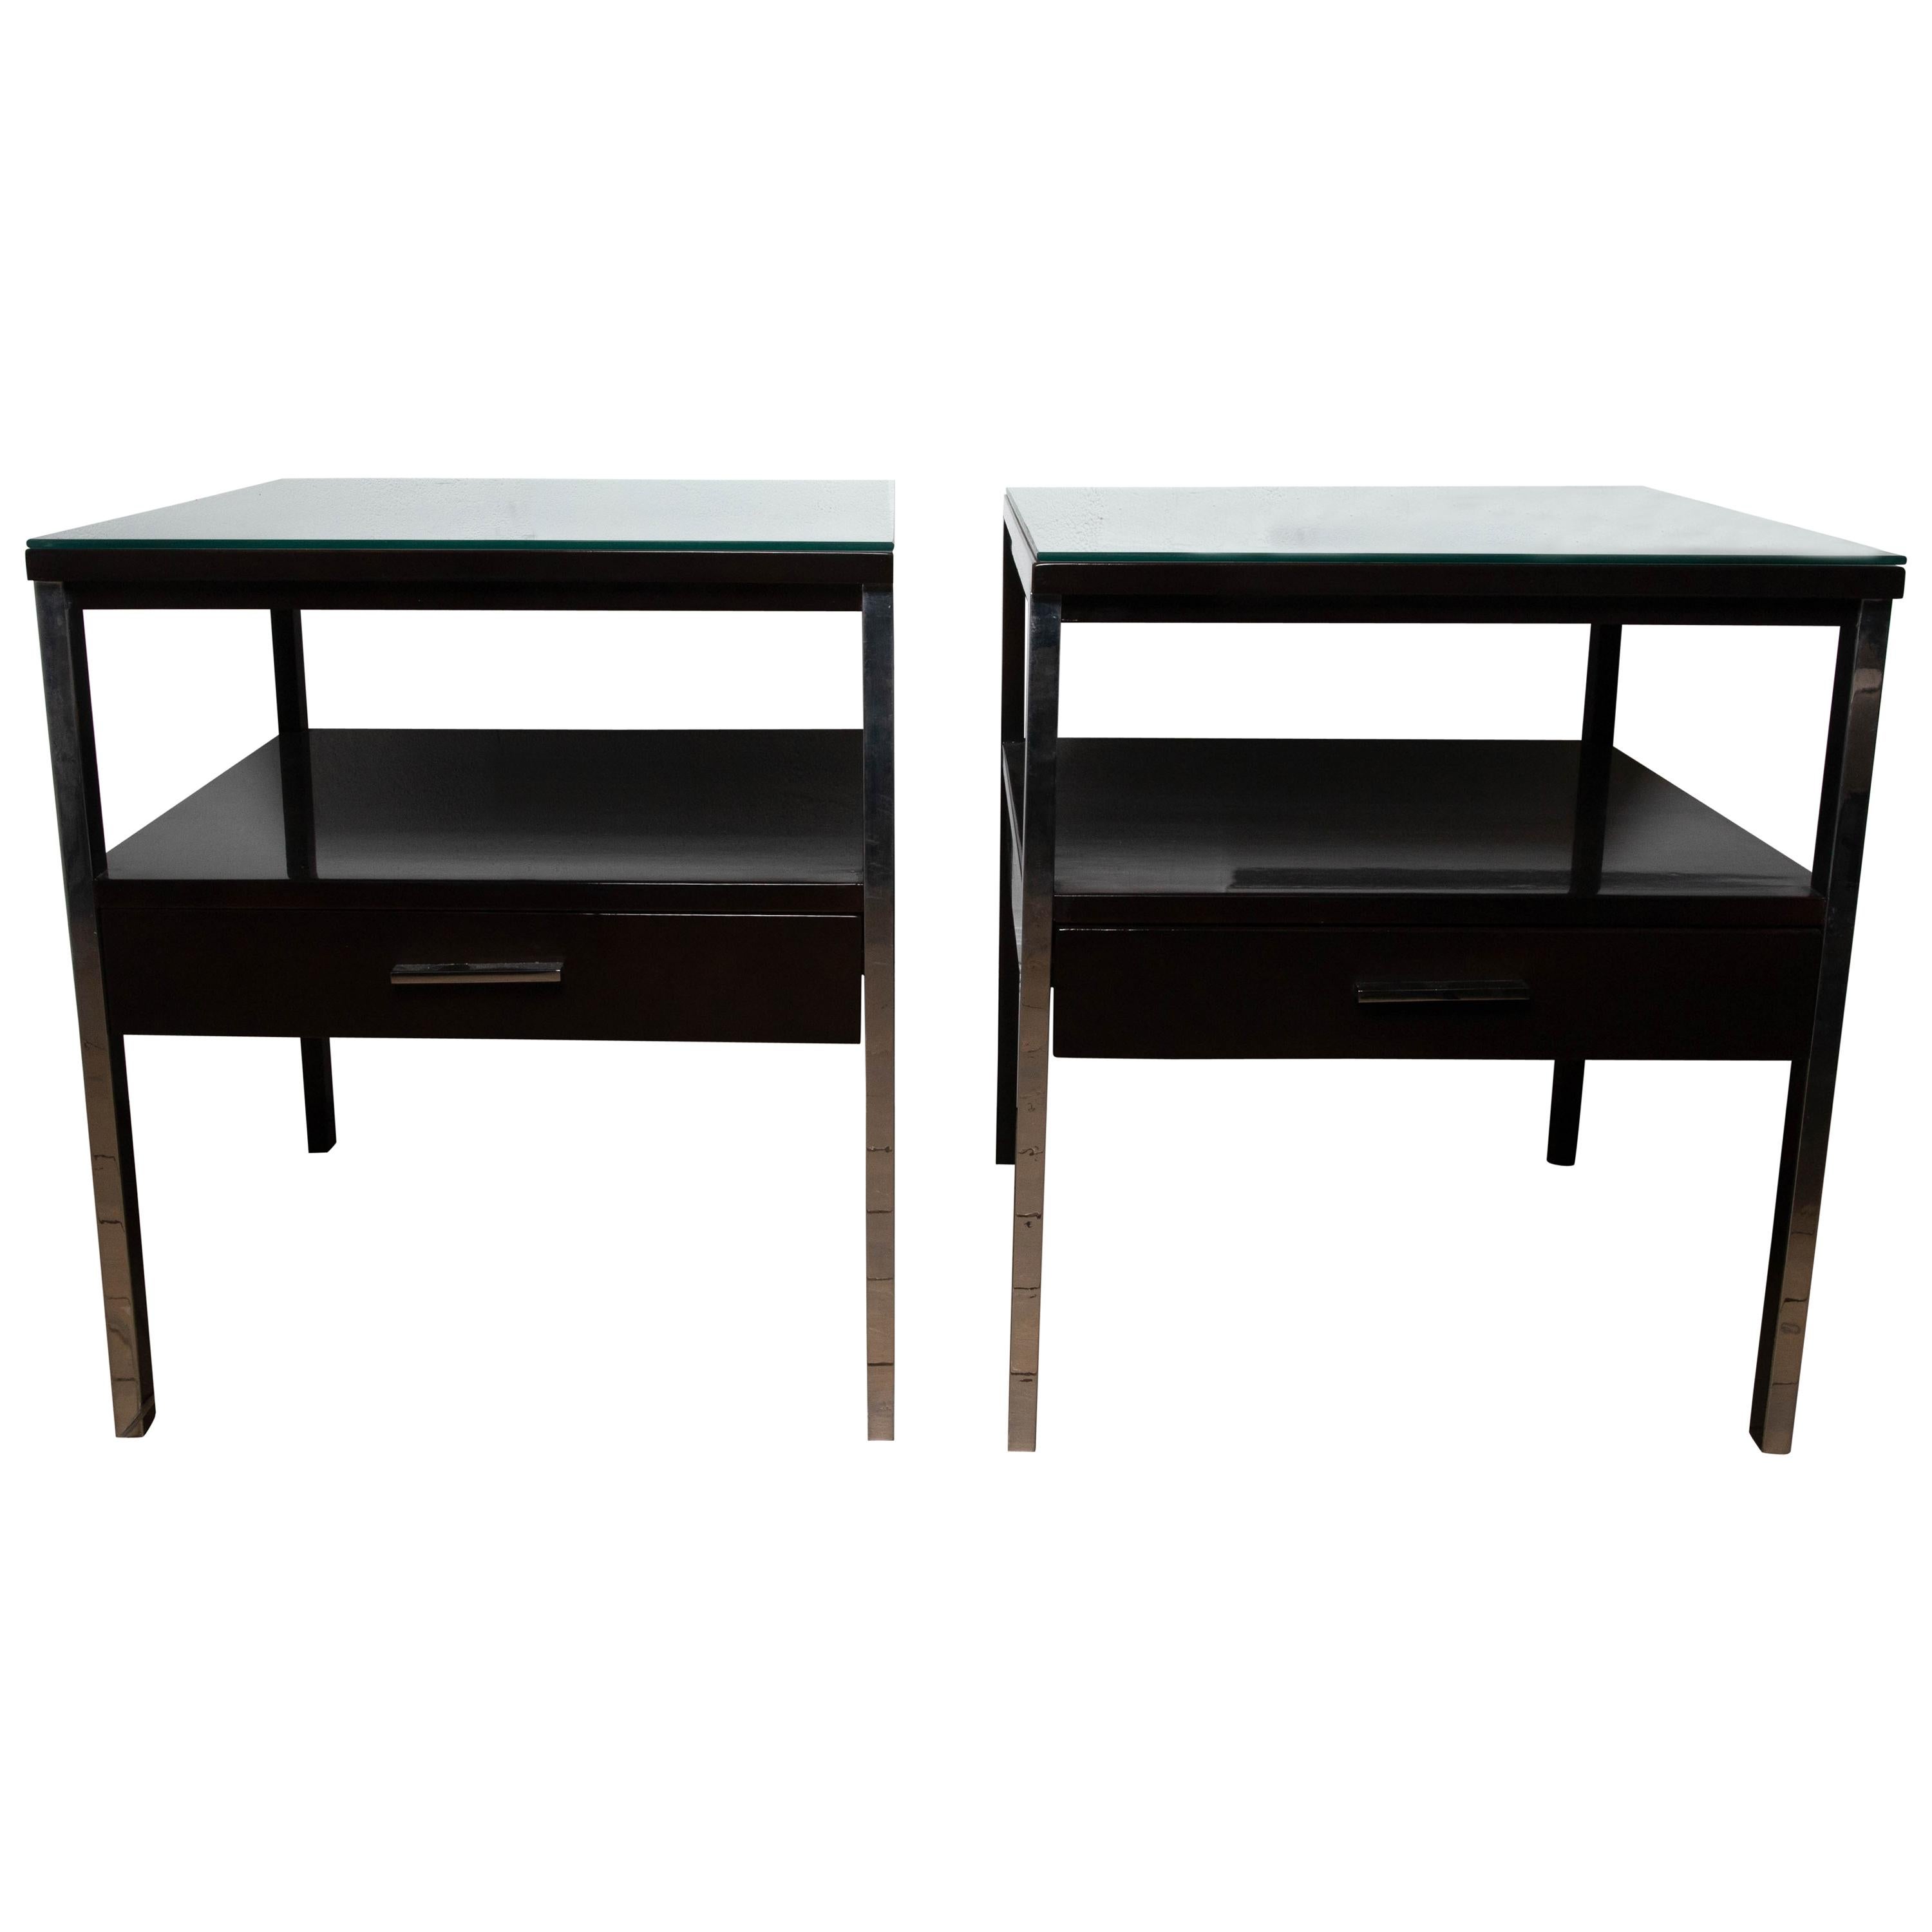 Pair of Lacquered Wood Tables with Chrome Details, by Paul McCobb